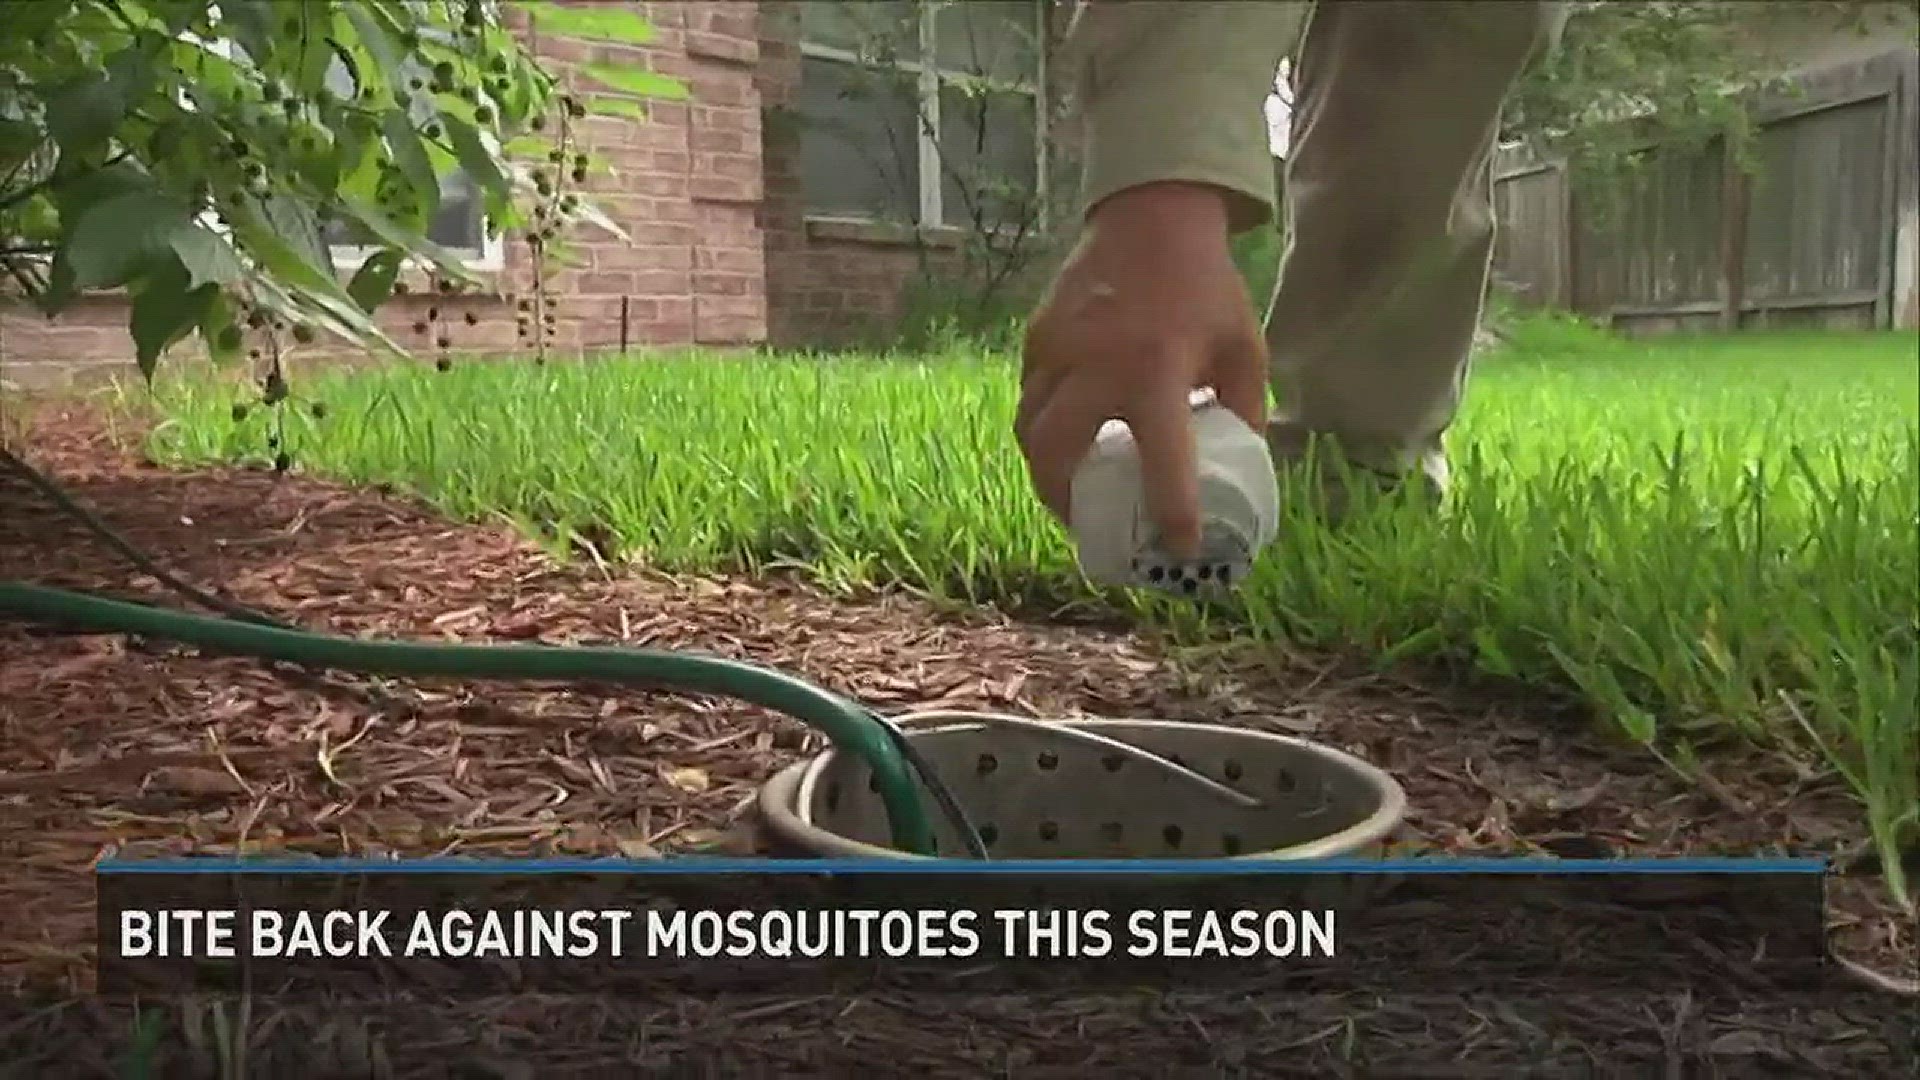 Local company fighting pests and helping others.